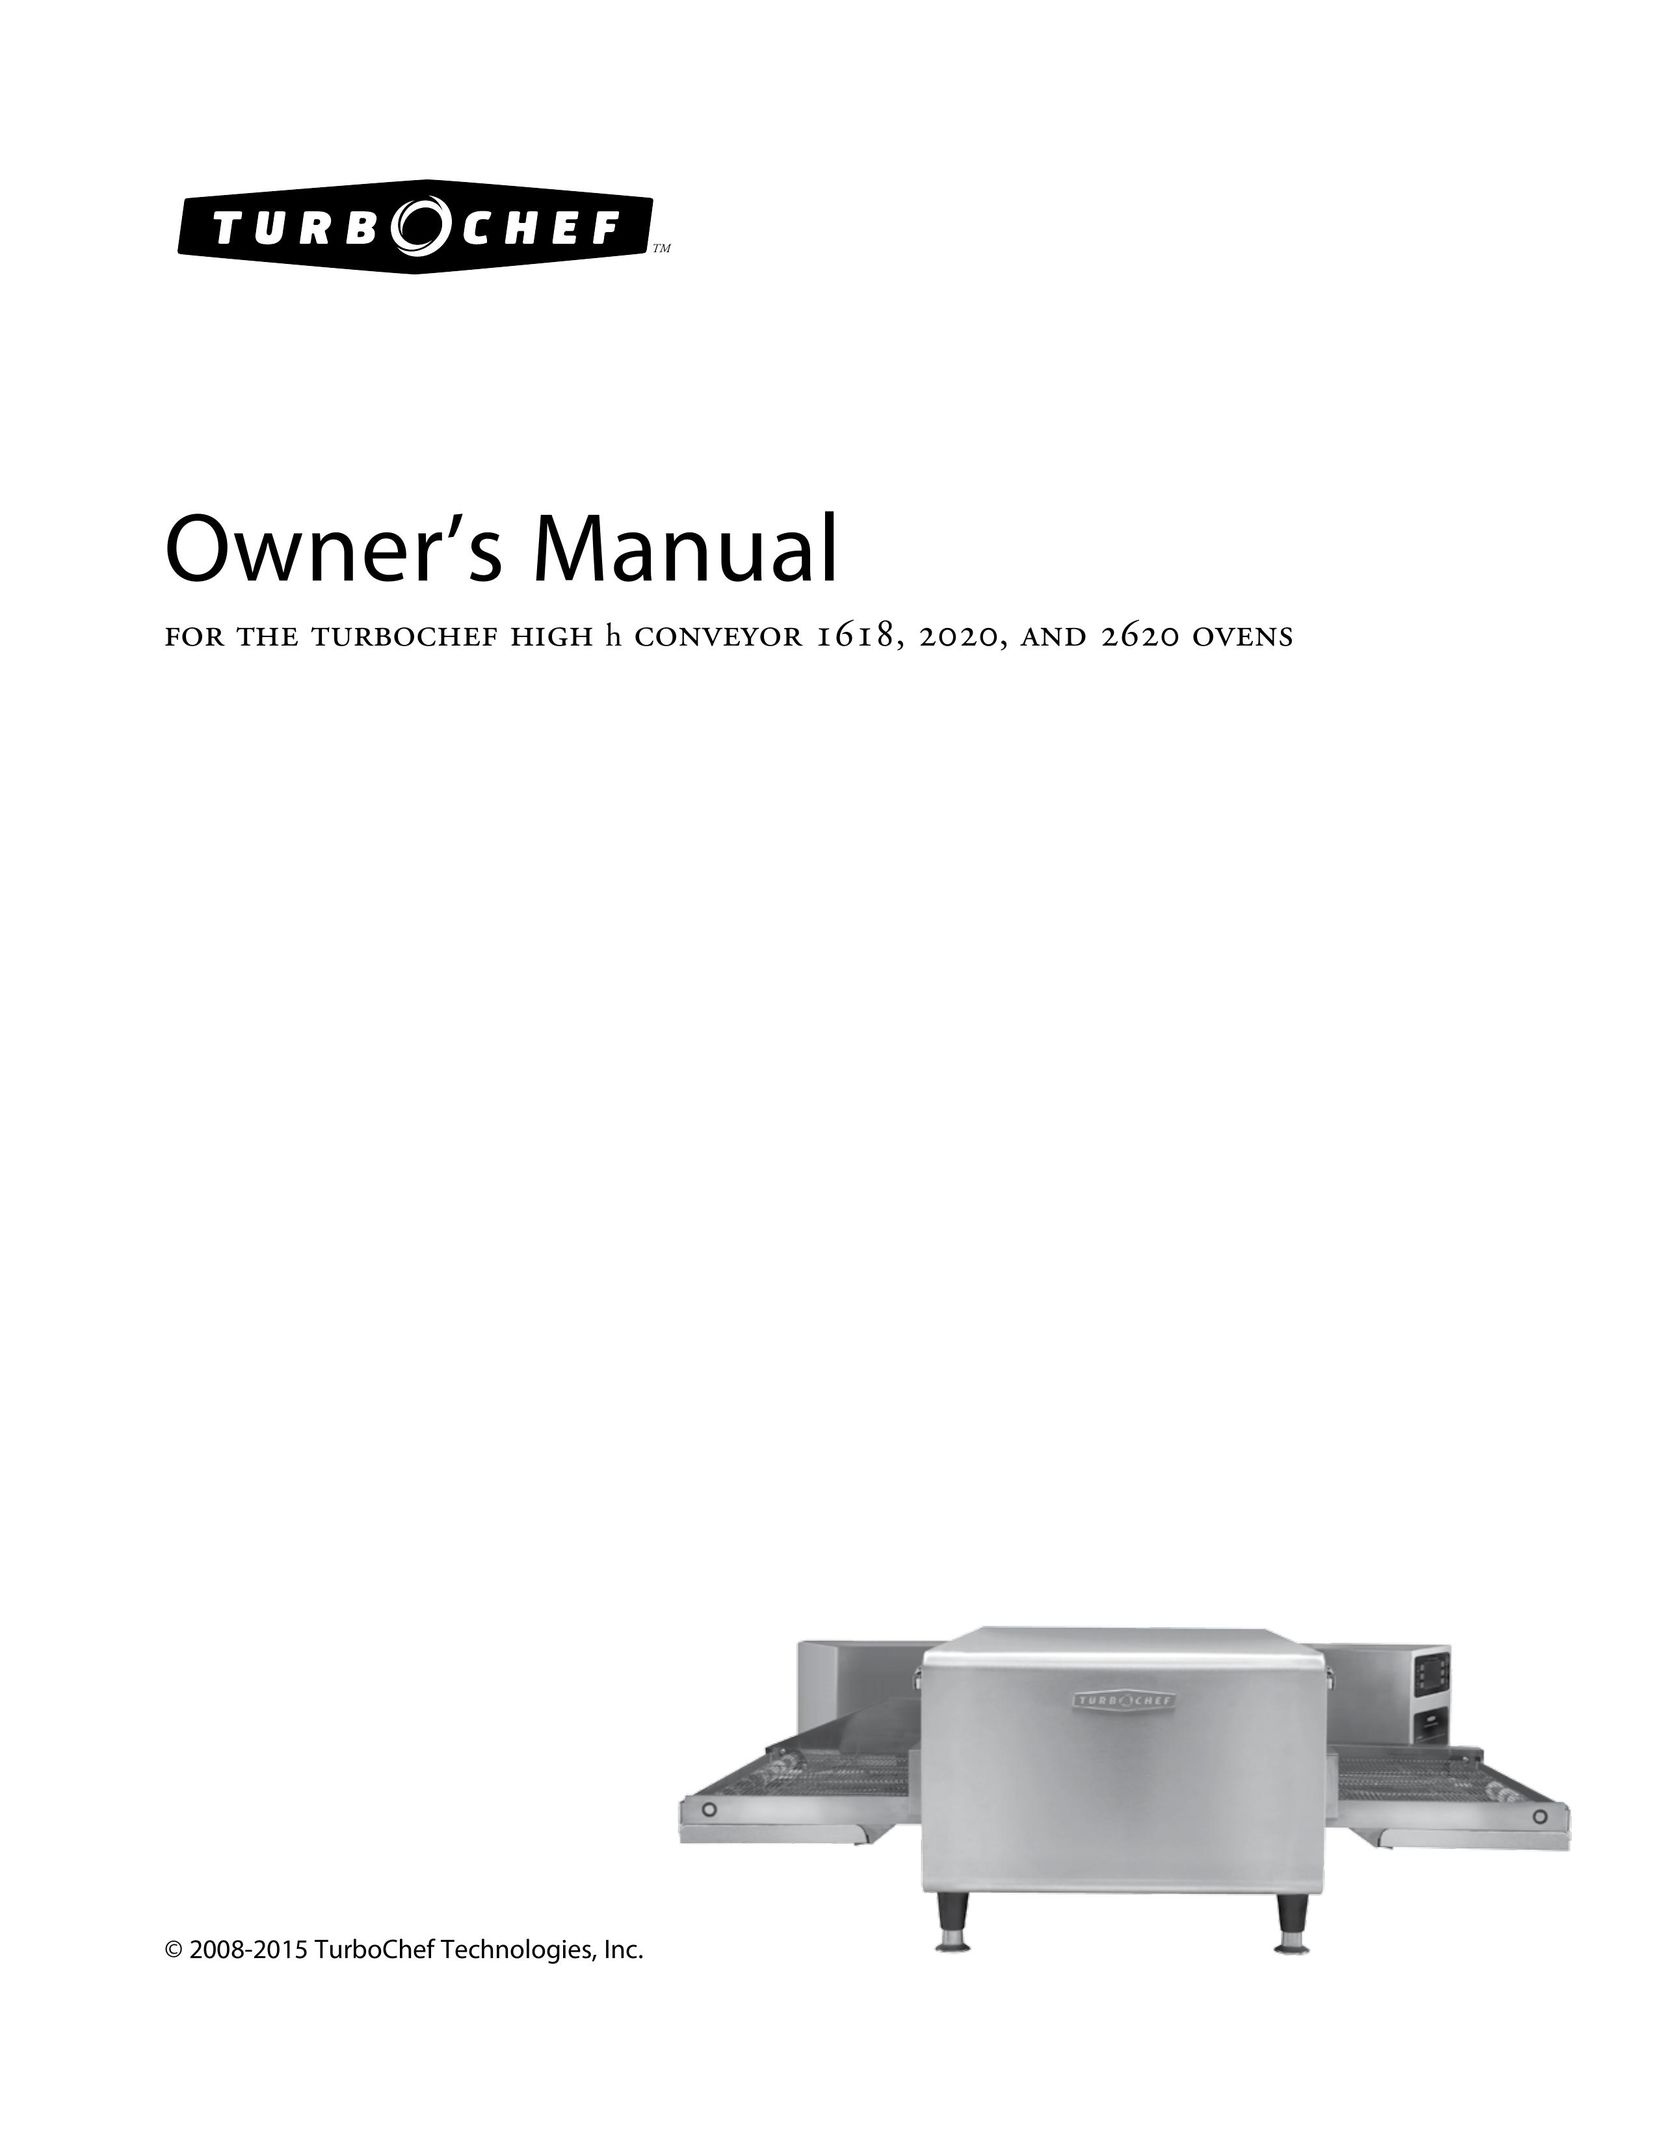 Turbo Chef Technologies and 2620 ovens Convection Oven User Manual